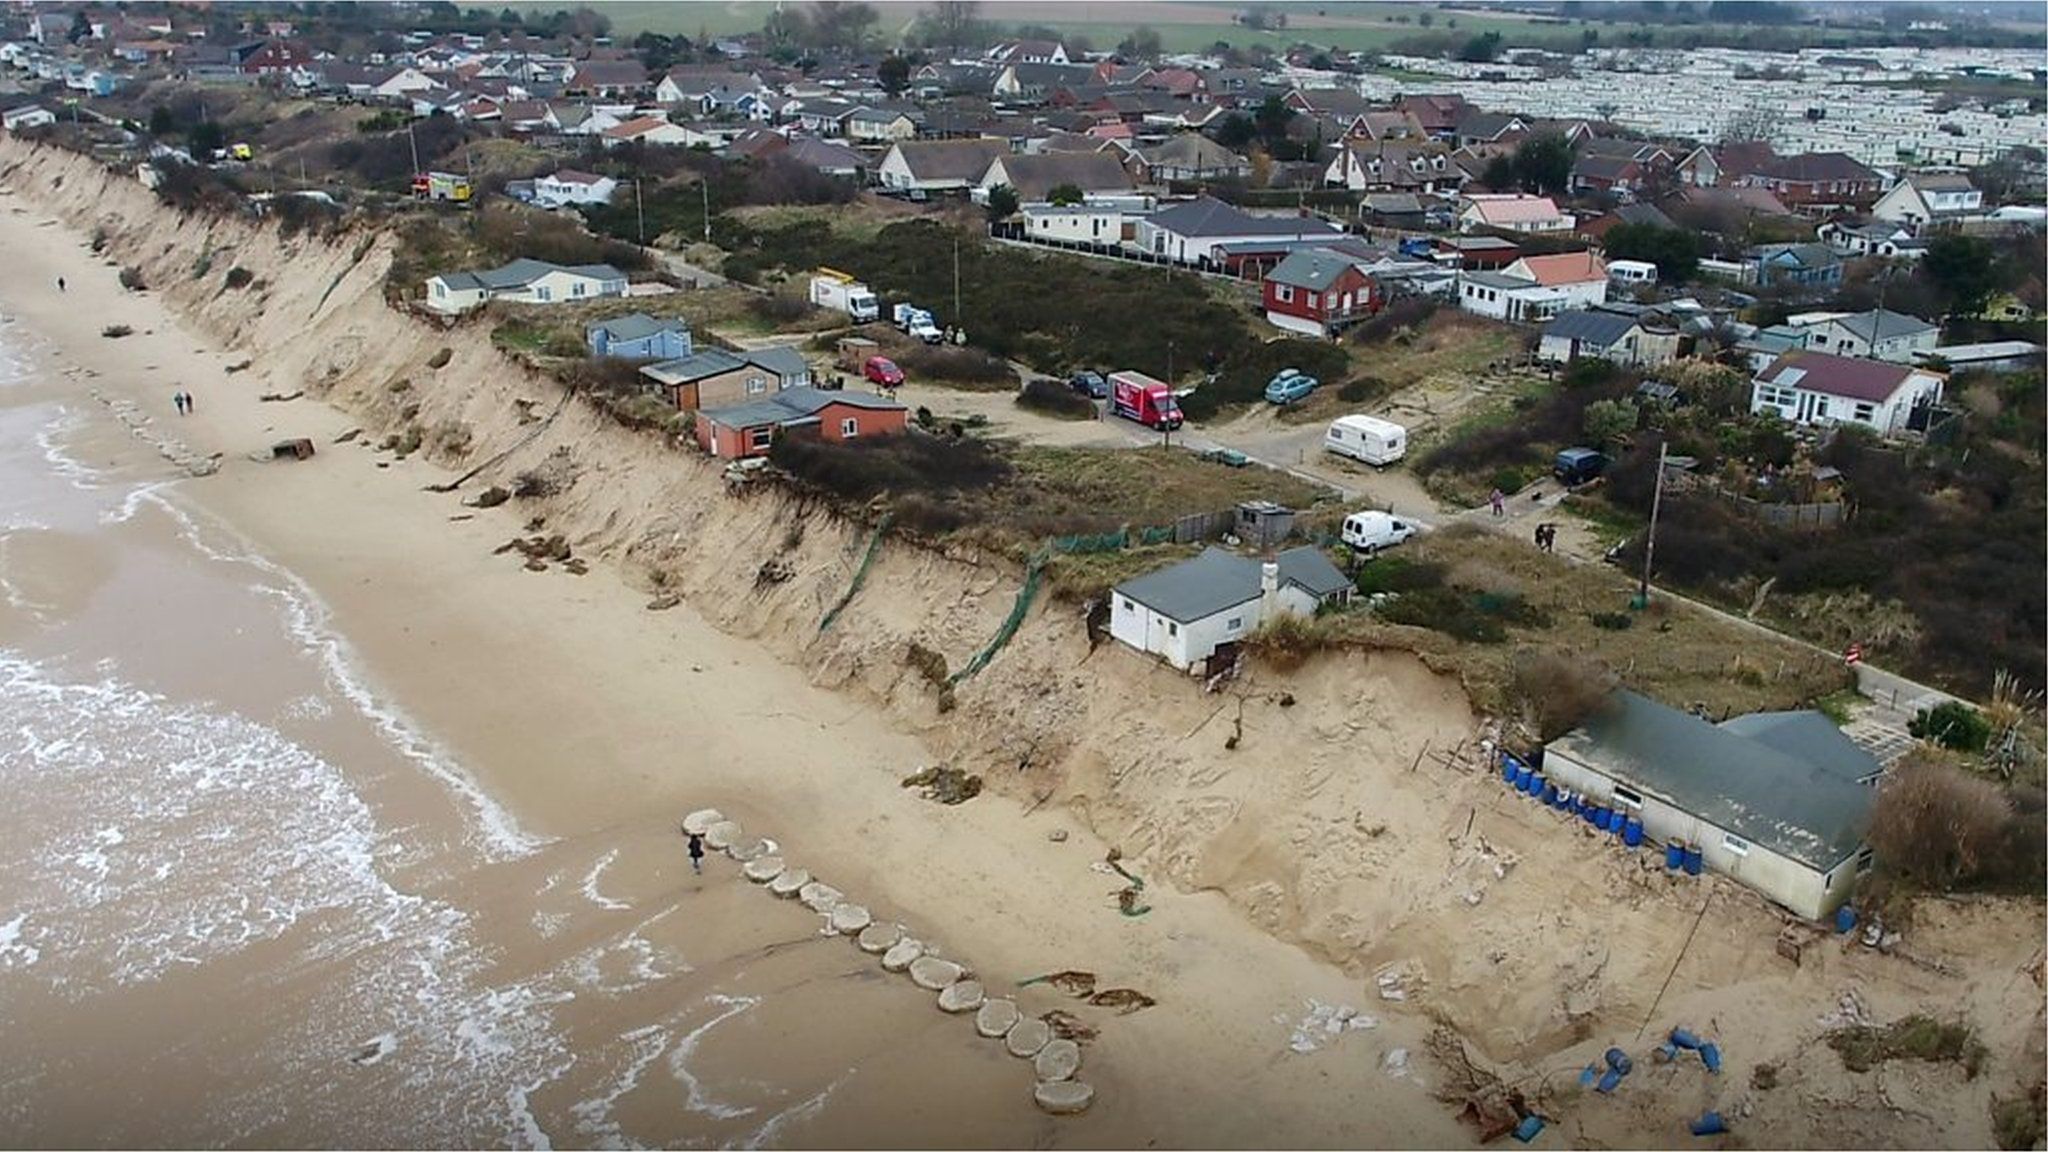 Aerial view of Hemsby homes on cliff